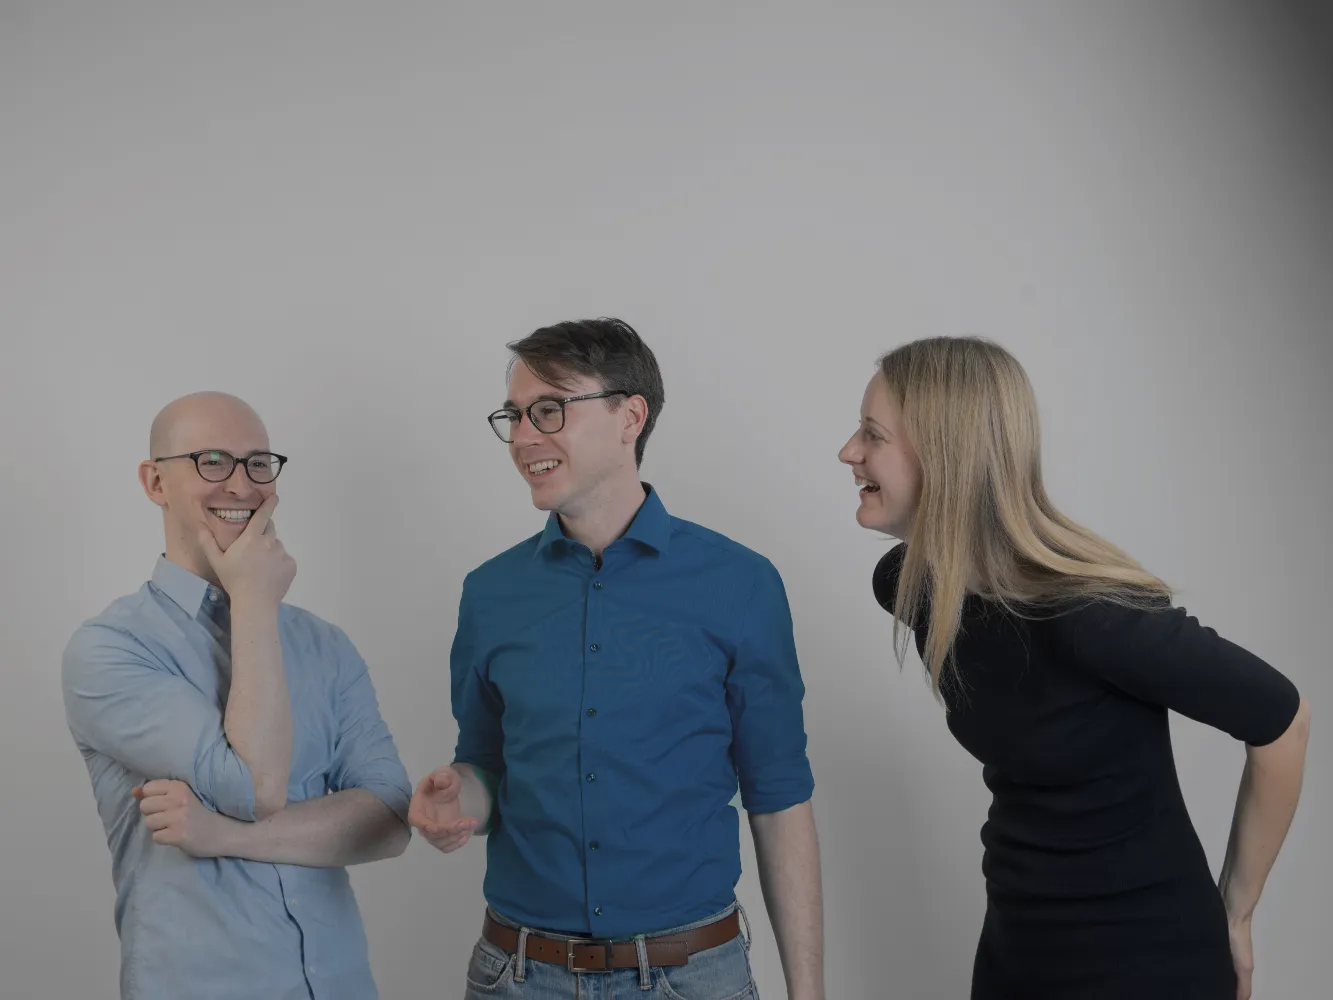 Gabriel Reimers, Julius Peinelt and Anna Neovesky laughing in front of a gray background